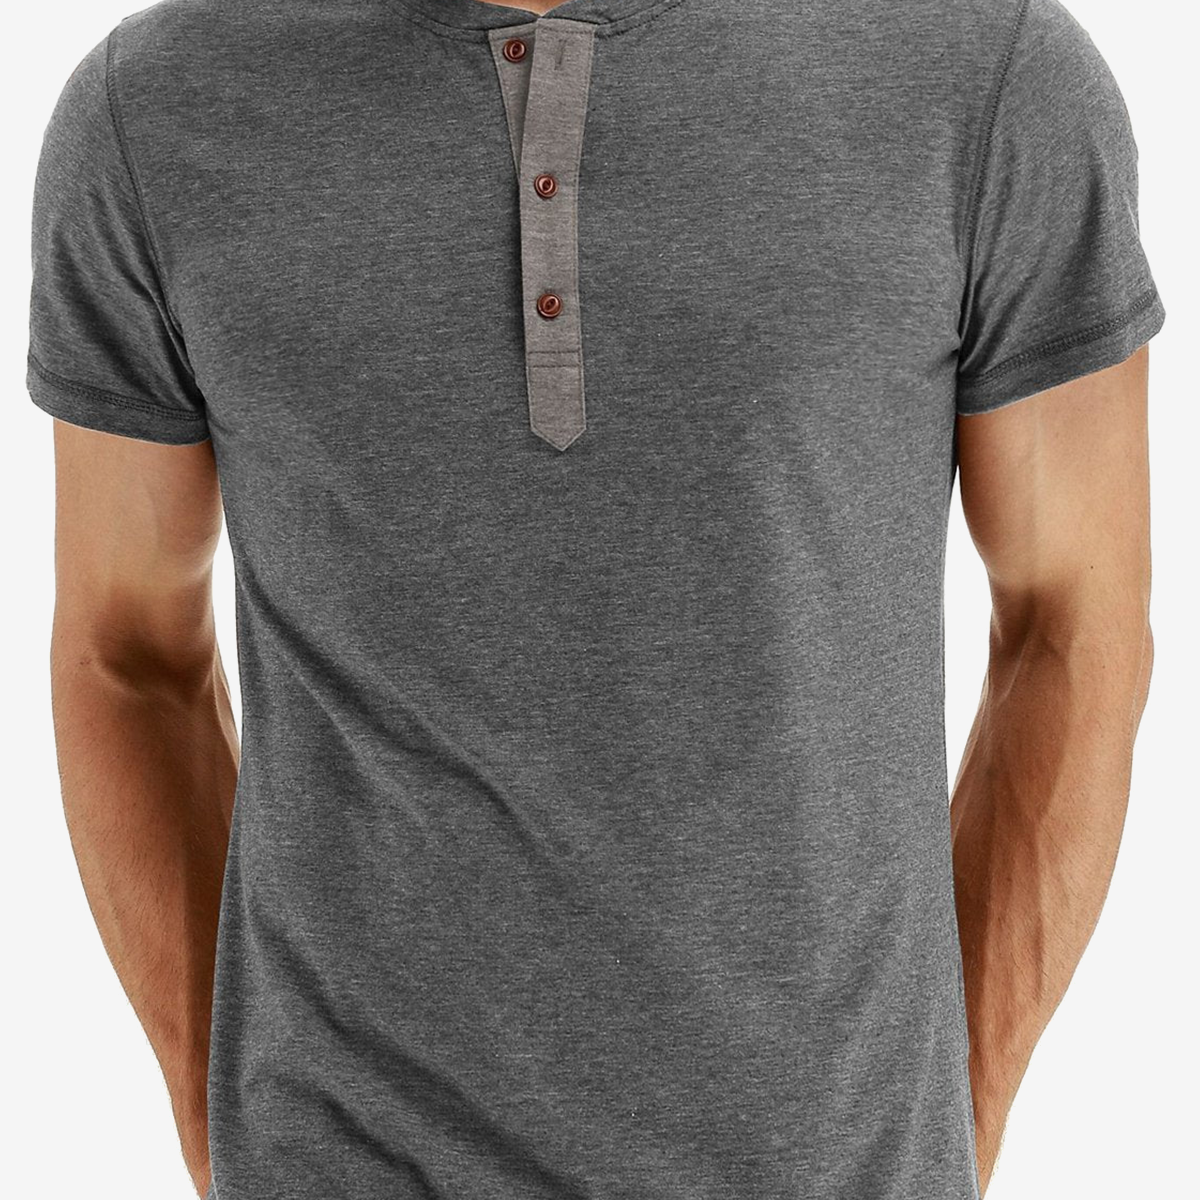 Men's Casual Solid Color Short Sleeve T-shirt